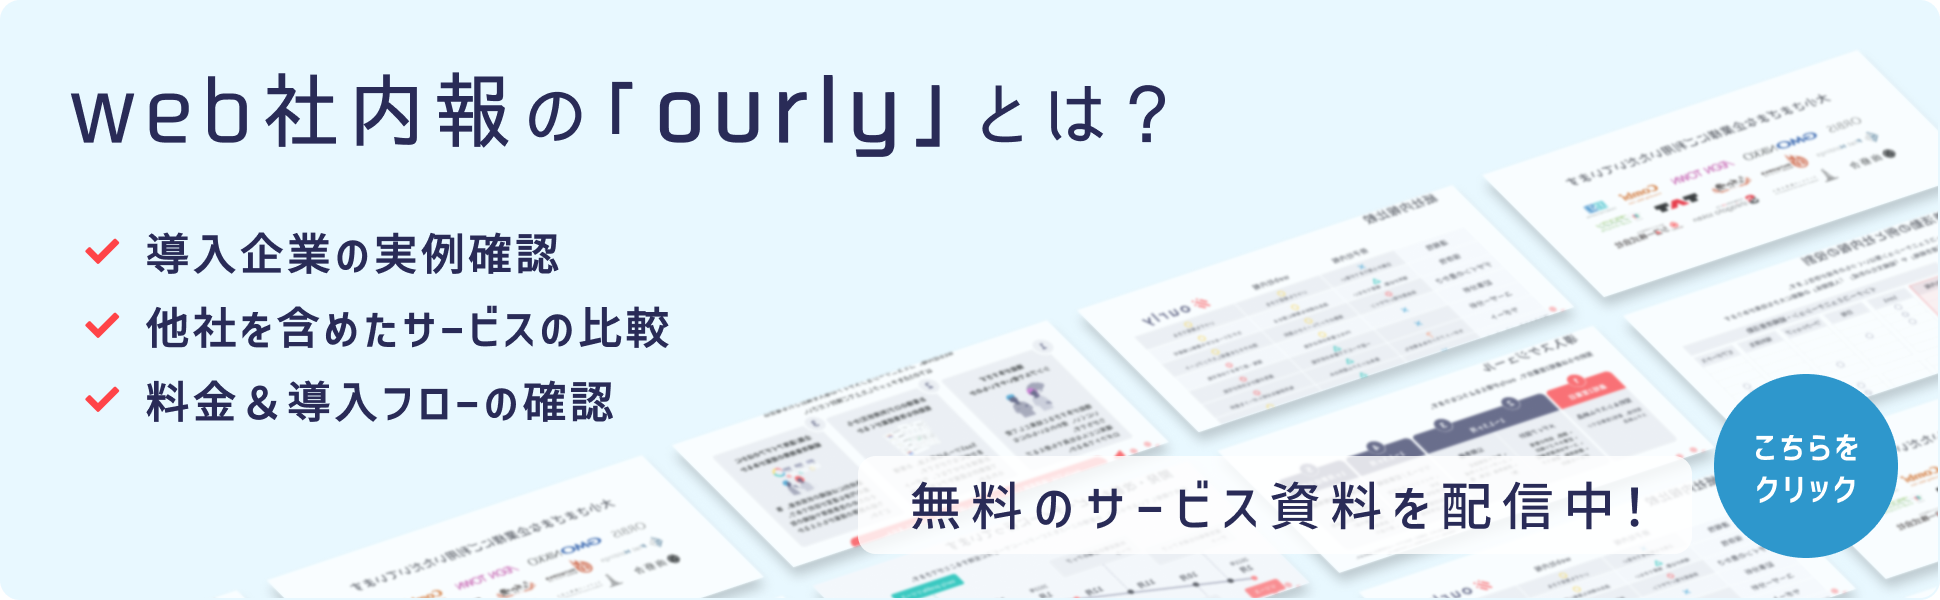 ourly トップバナー SD ourlyとは